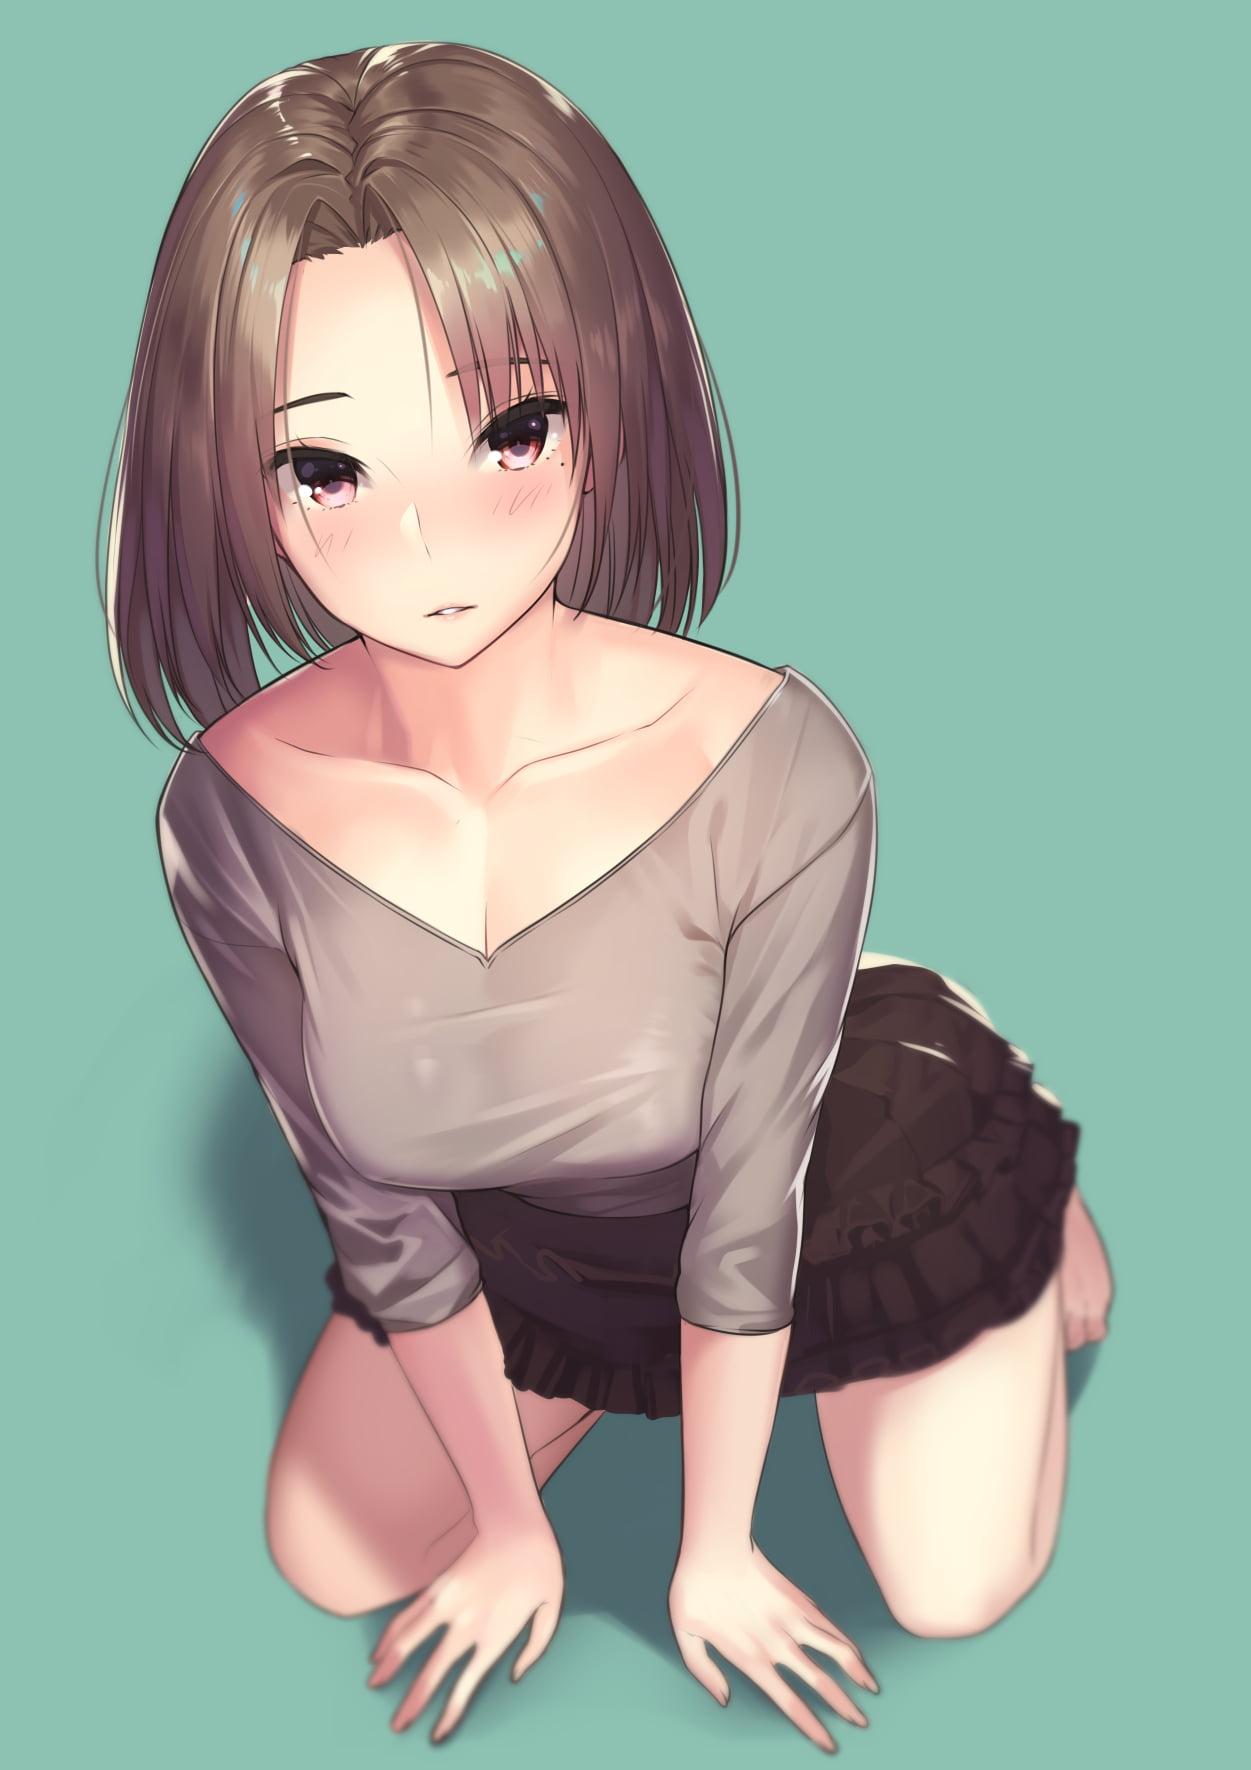 Female anime character, simple background, cleavage, short